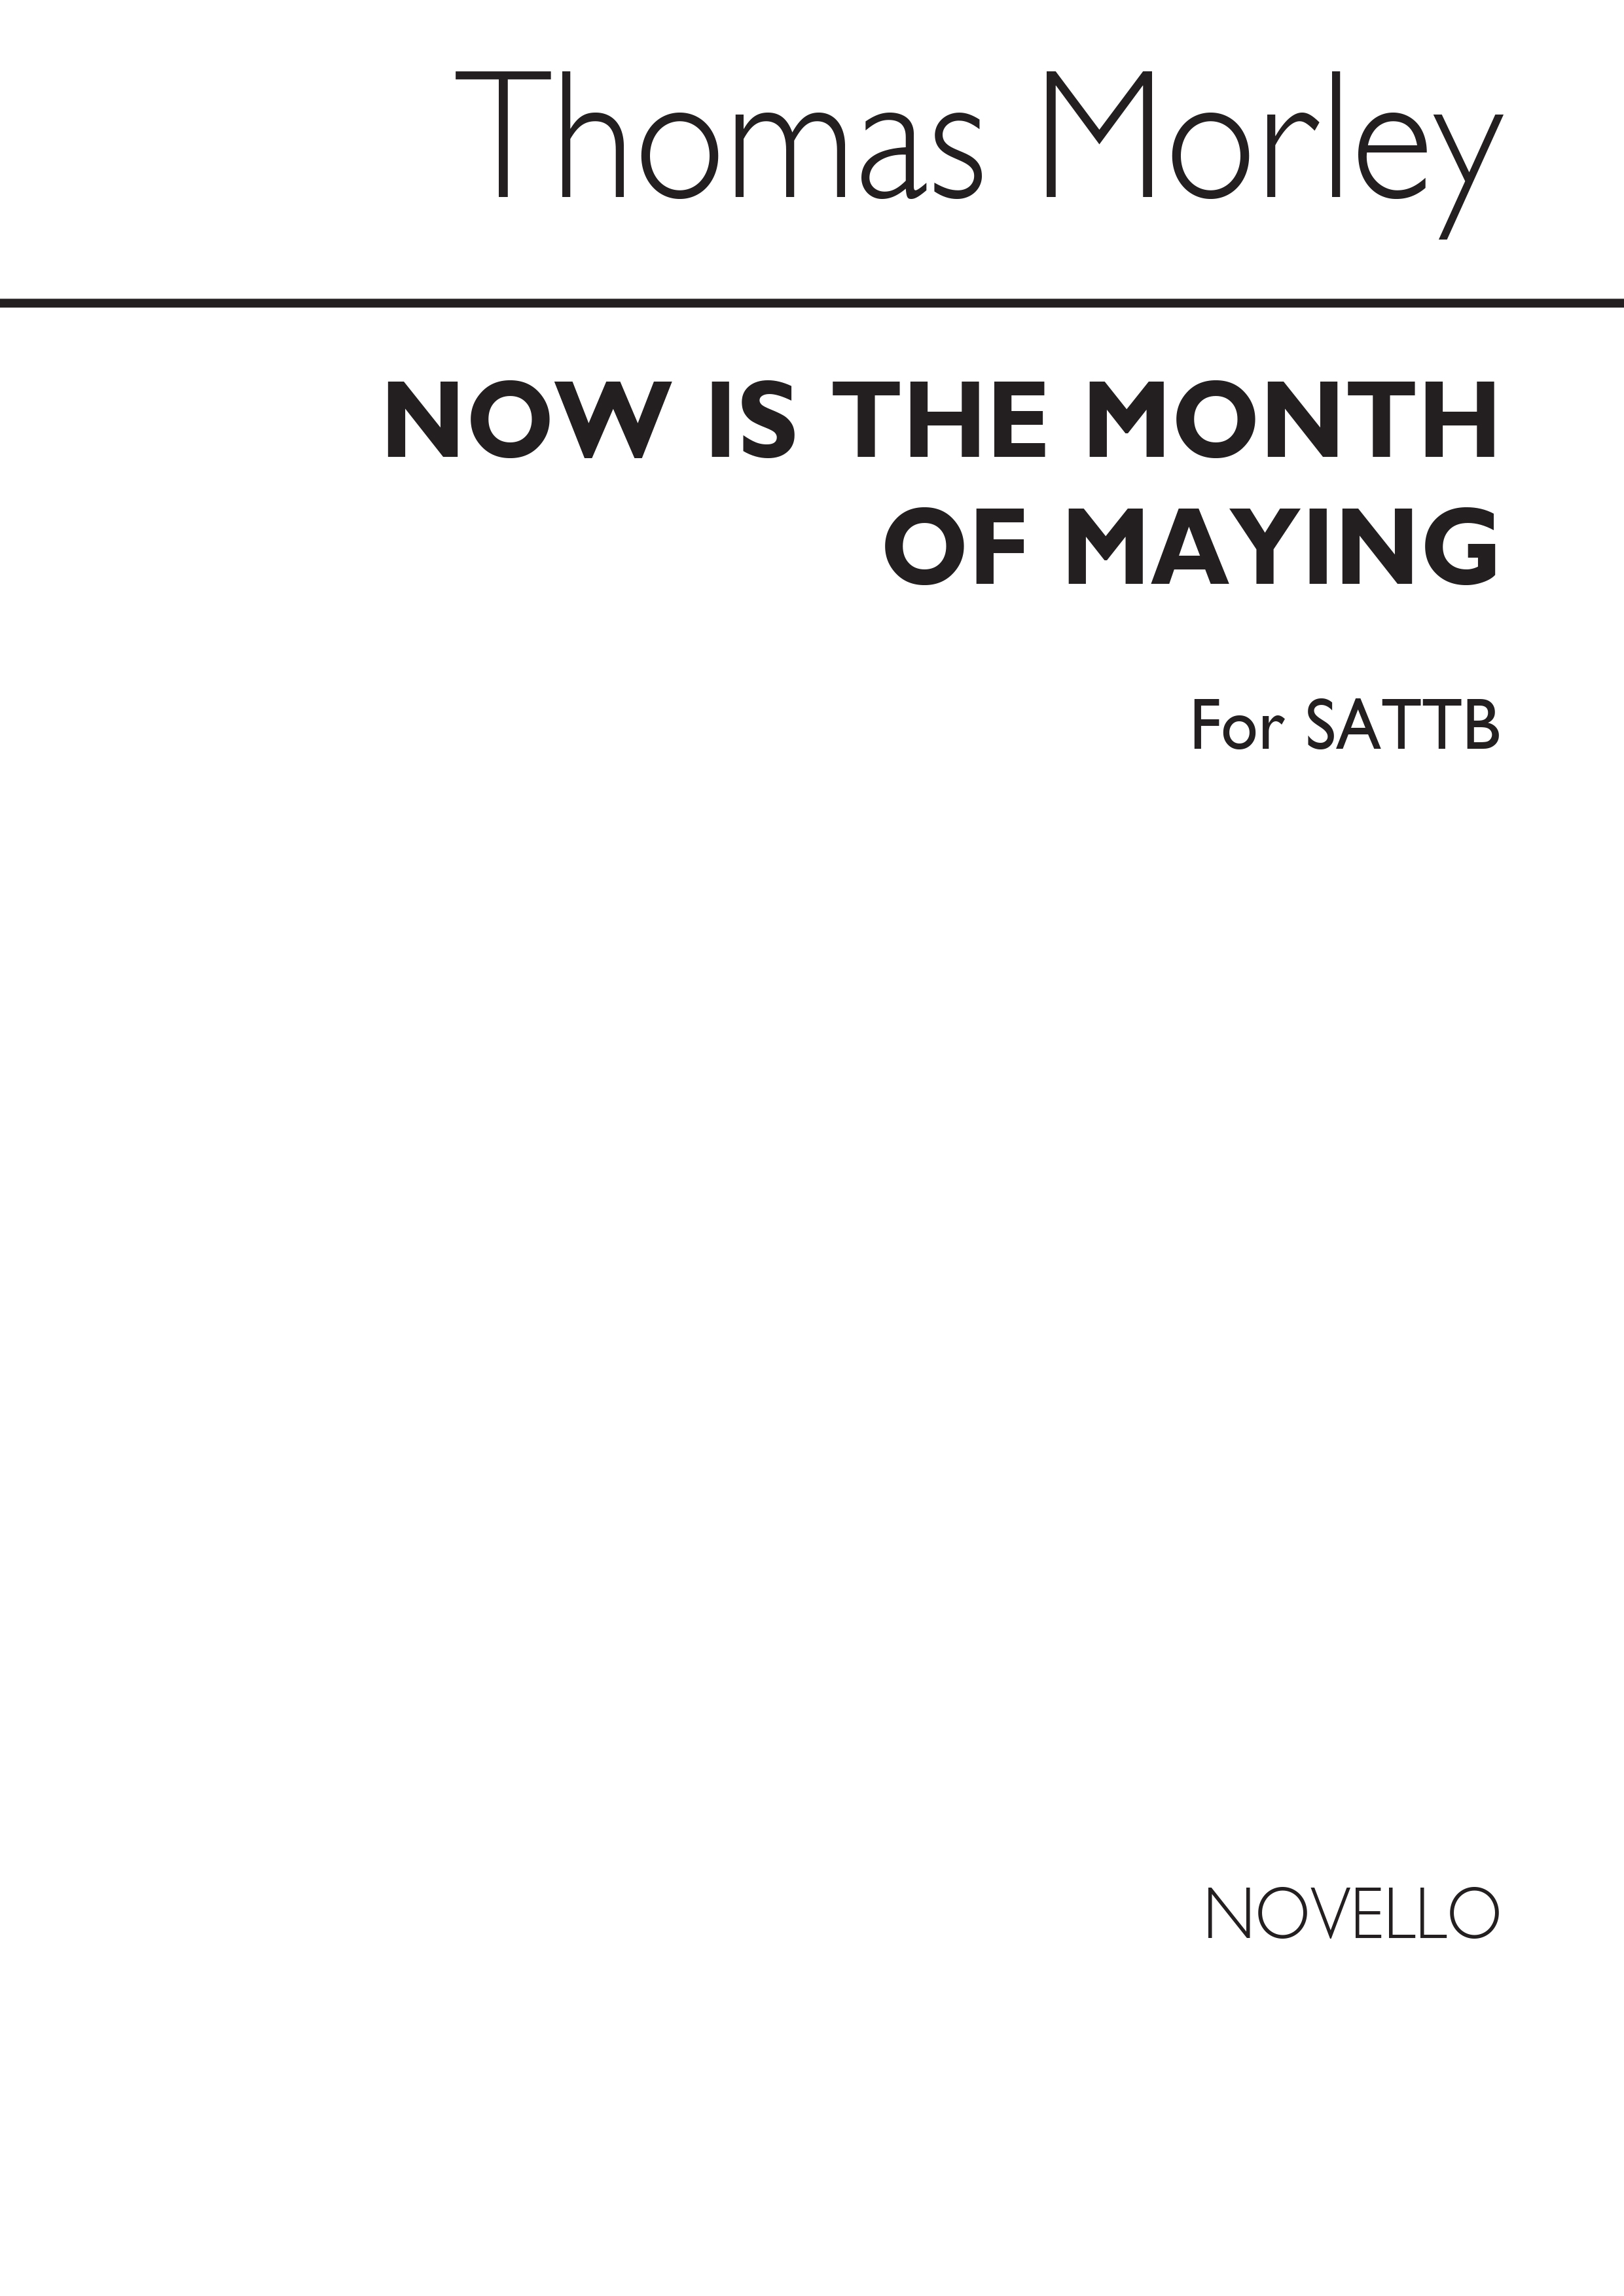 Thomas Morley: Now Is The Month Of Maying (SATTB)